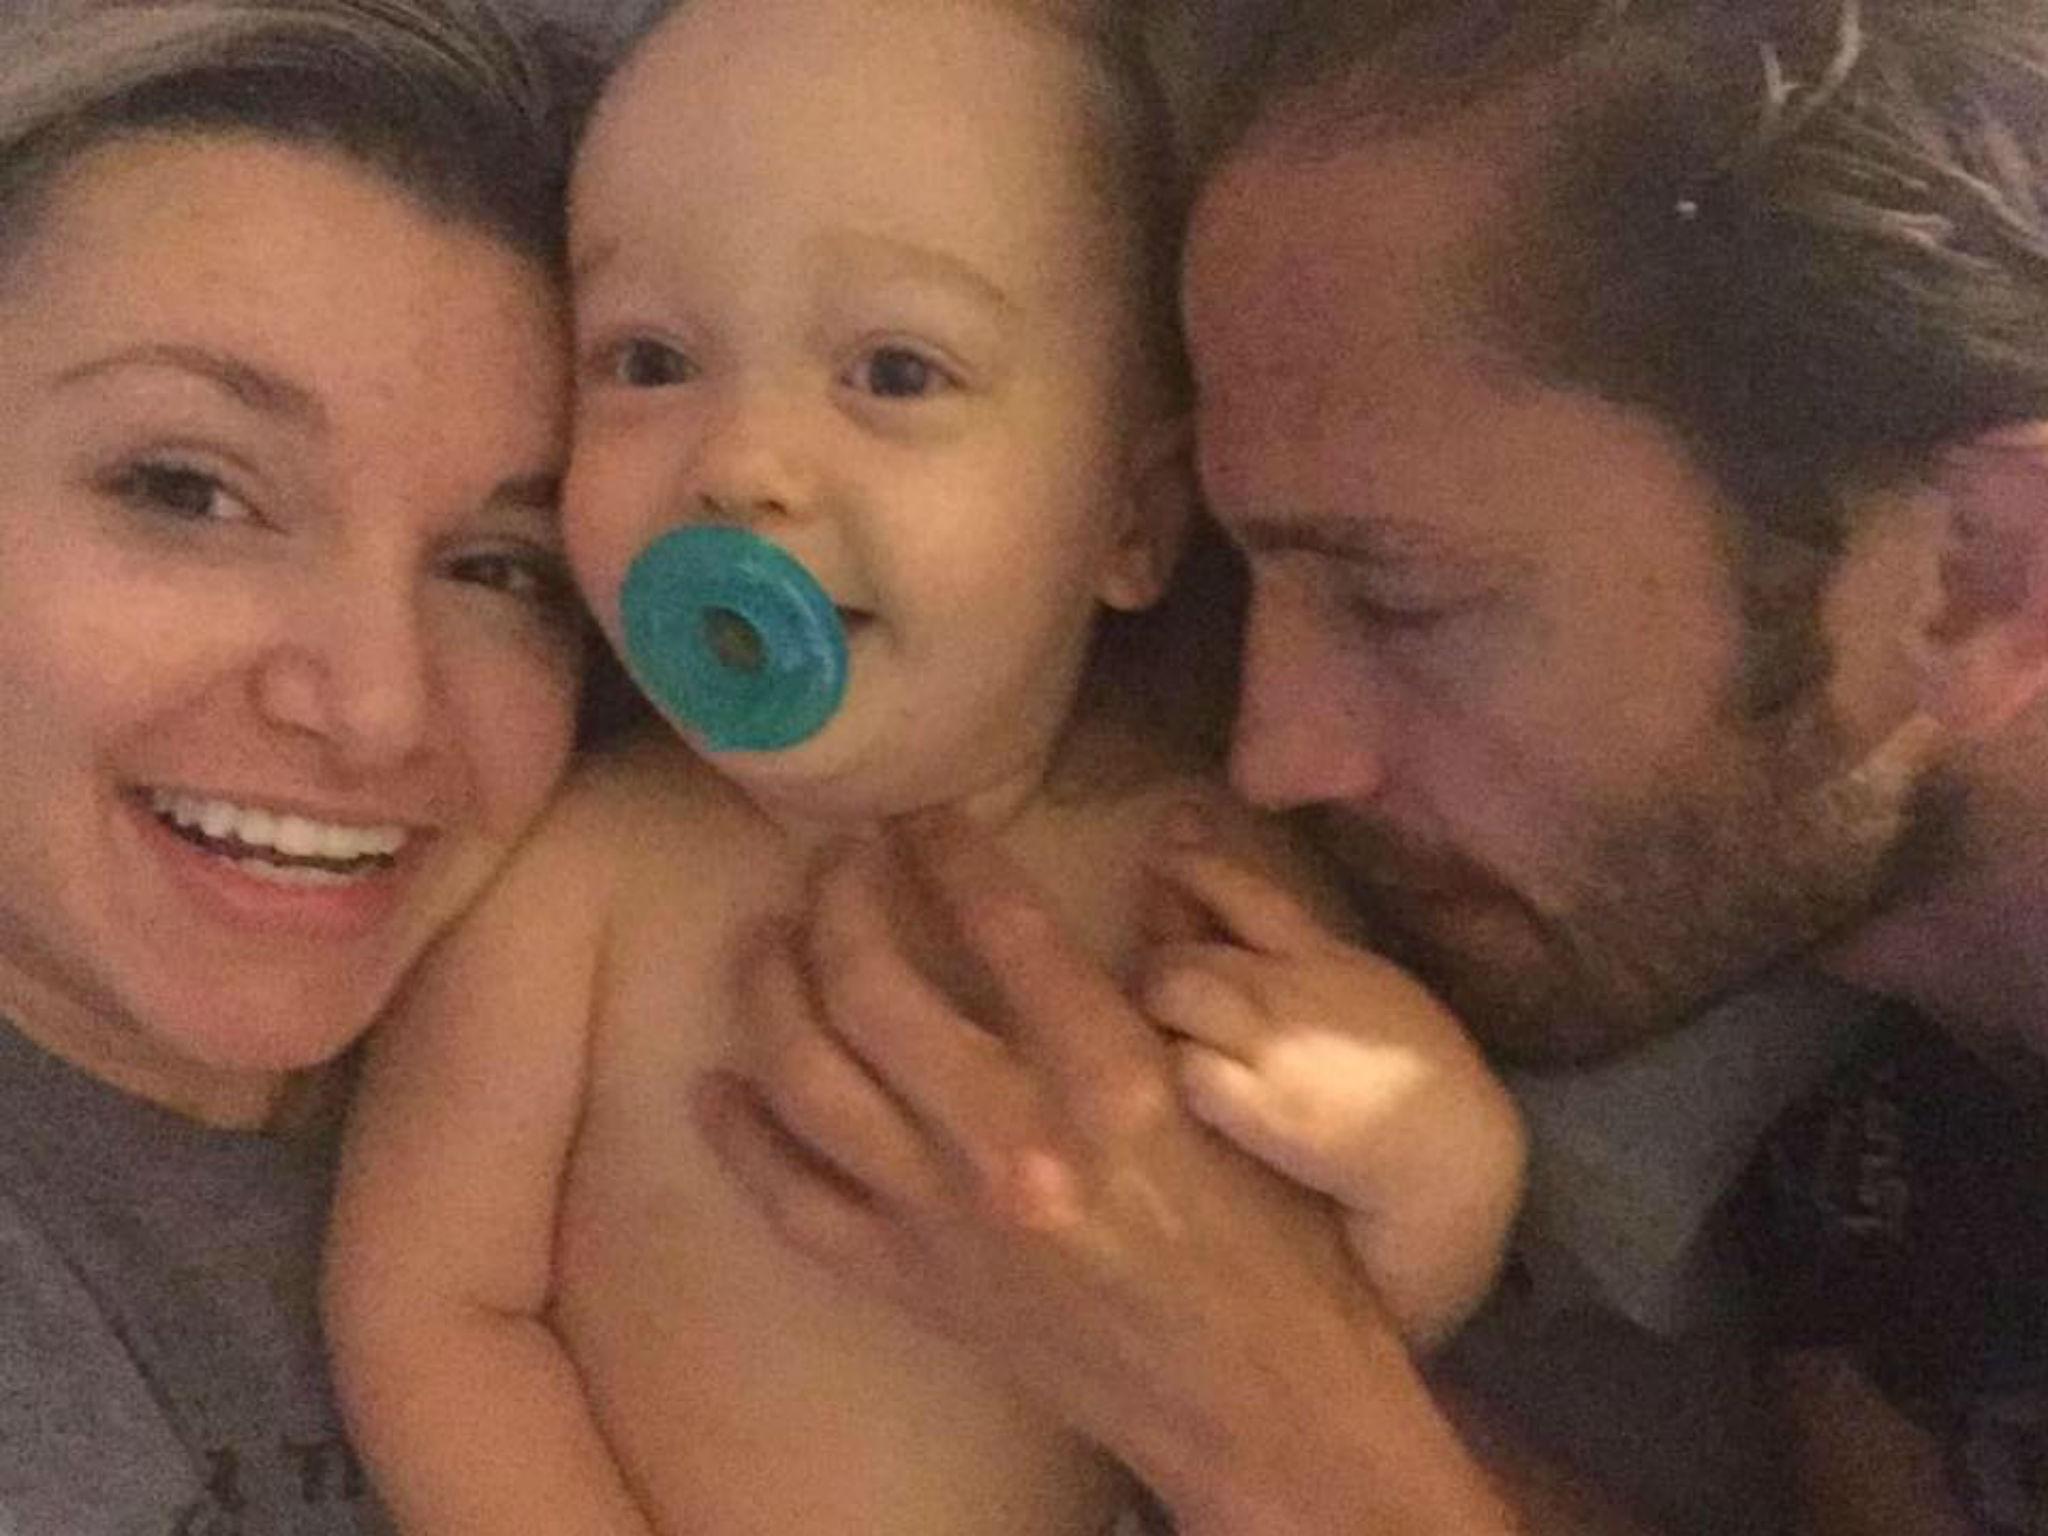 Marcus Kowal, Mishel Eder and their son Liam